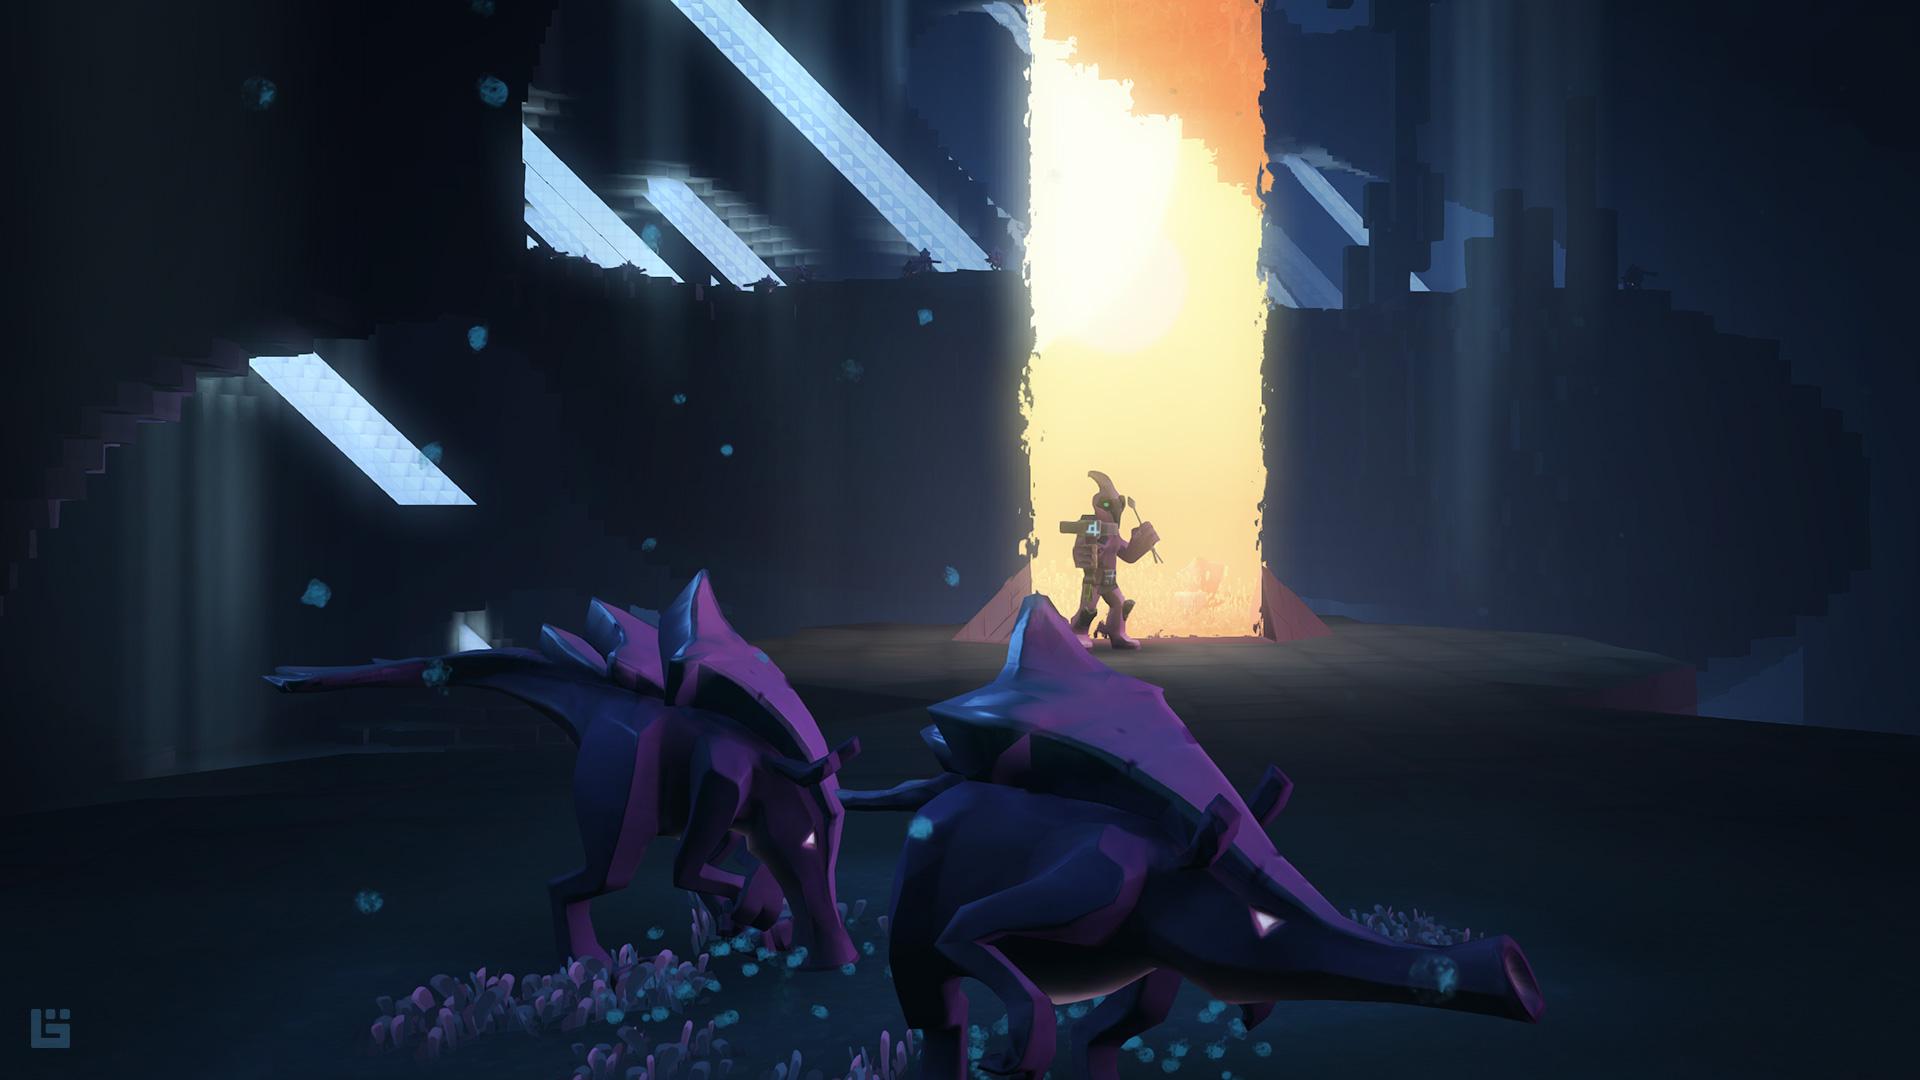 Screenshot №12 from game Boundless